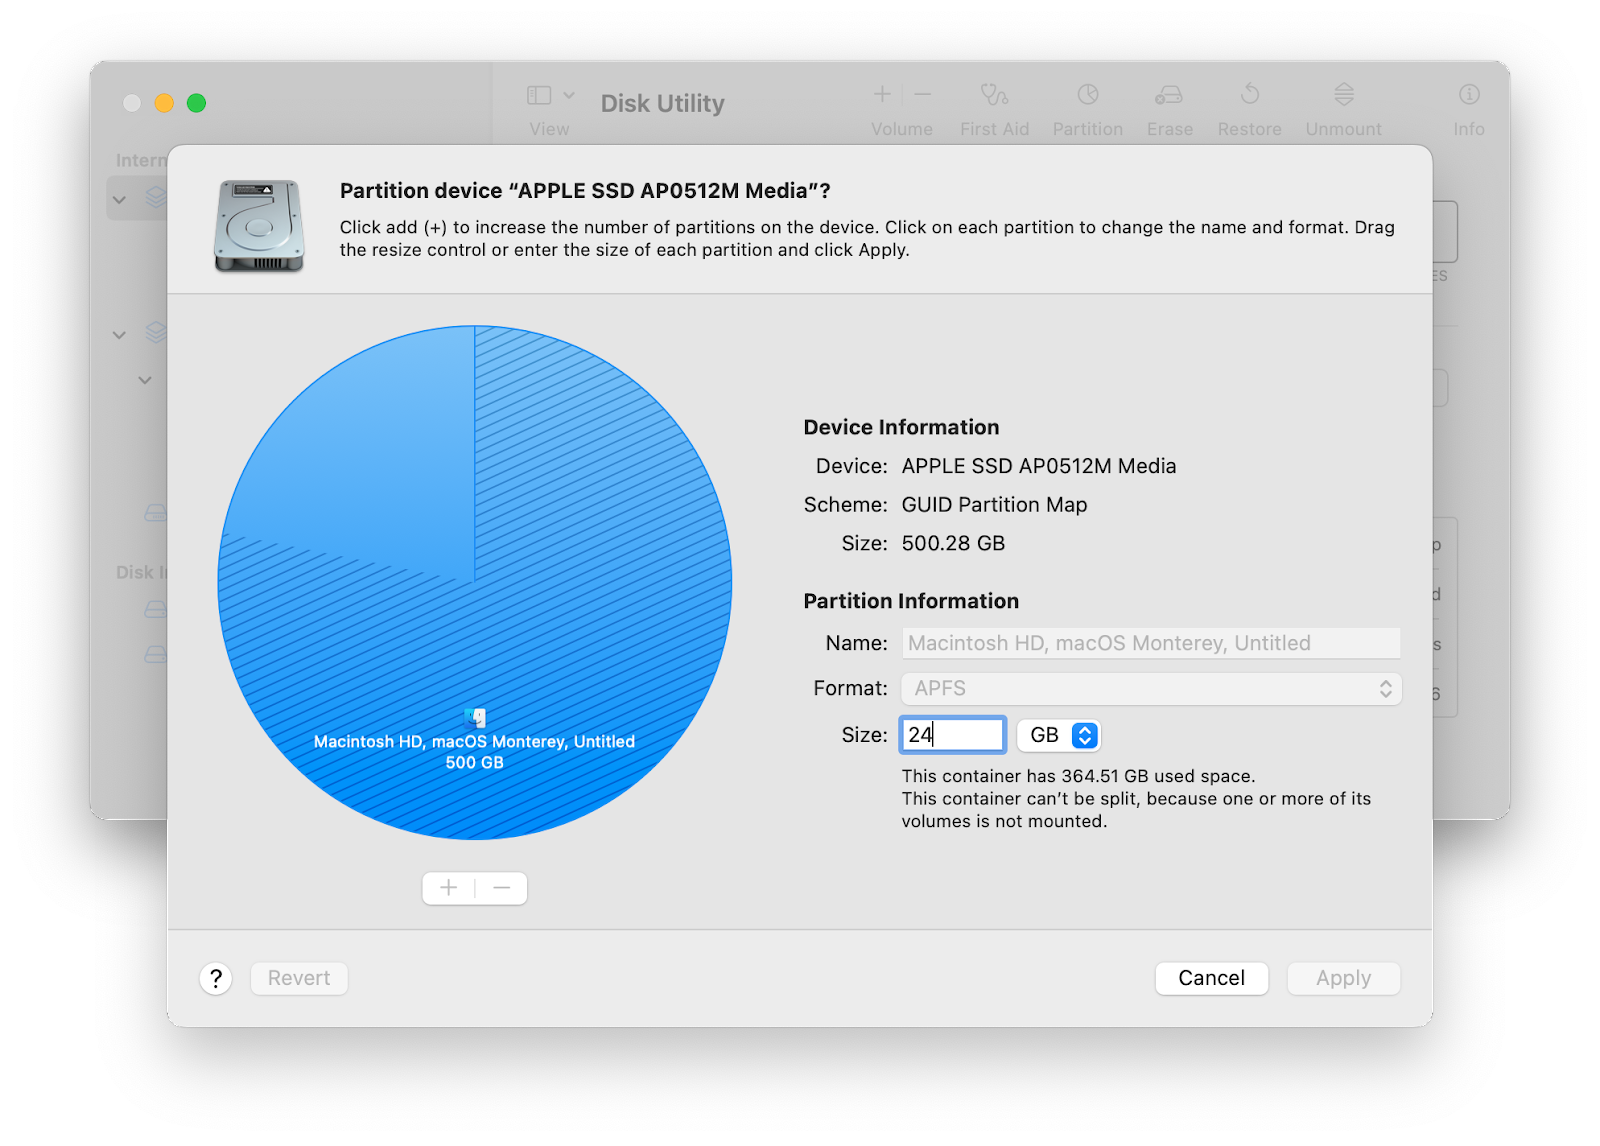 Partition device APPLE SSD